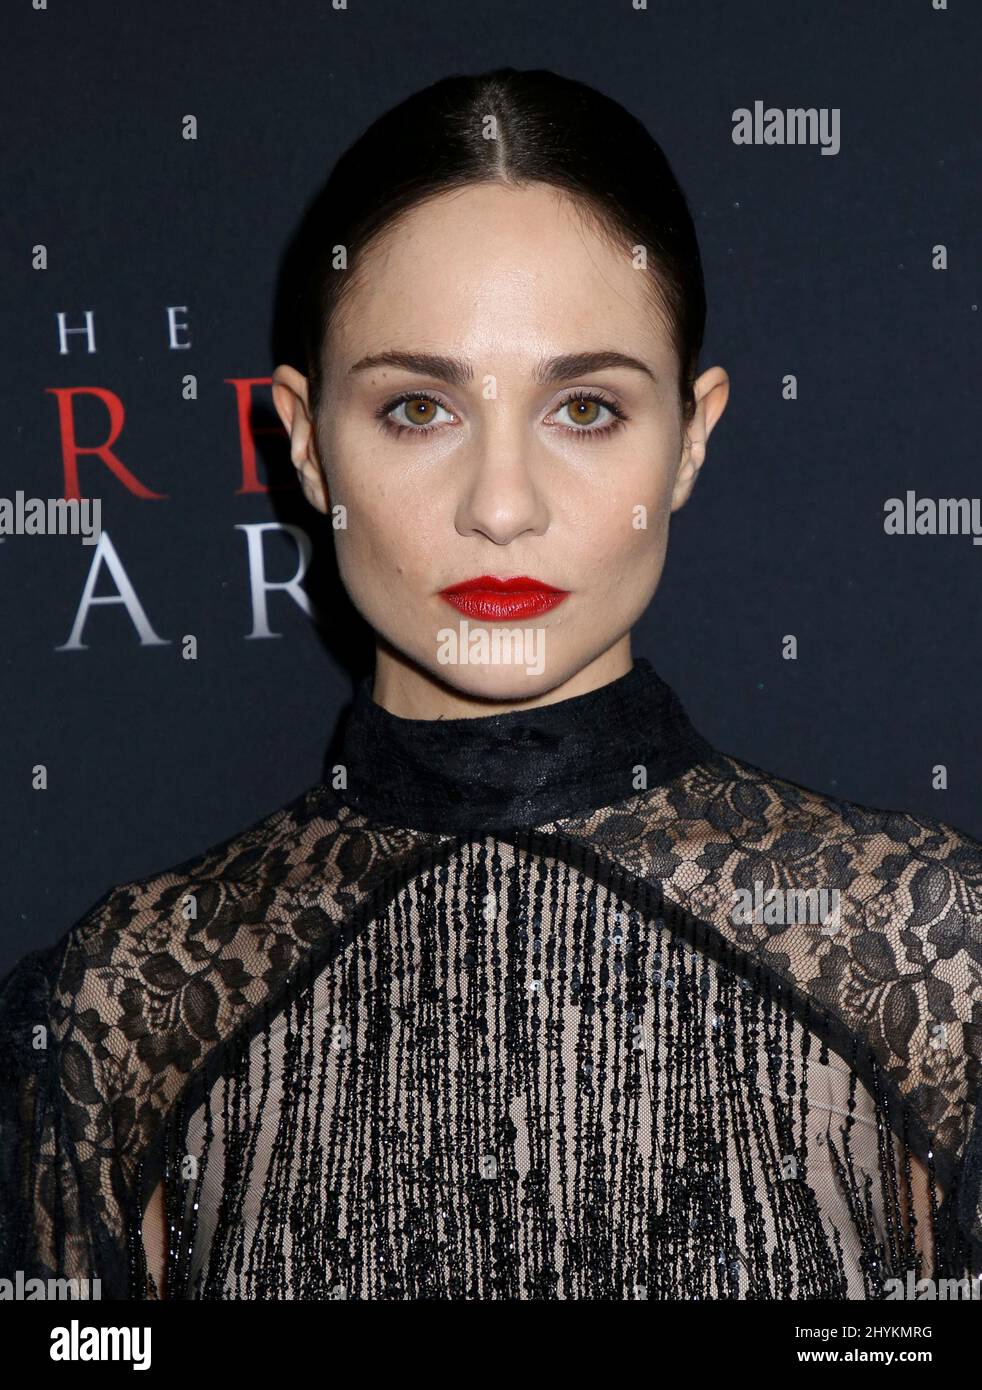 Tuppence Middleton nahm an der New Yorker Premiere „The Current war“ am 21. Oktober 2019 auf dem AMC Lincoln Square in New York City, NY, Teil Stockfoto